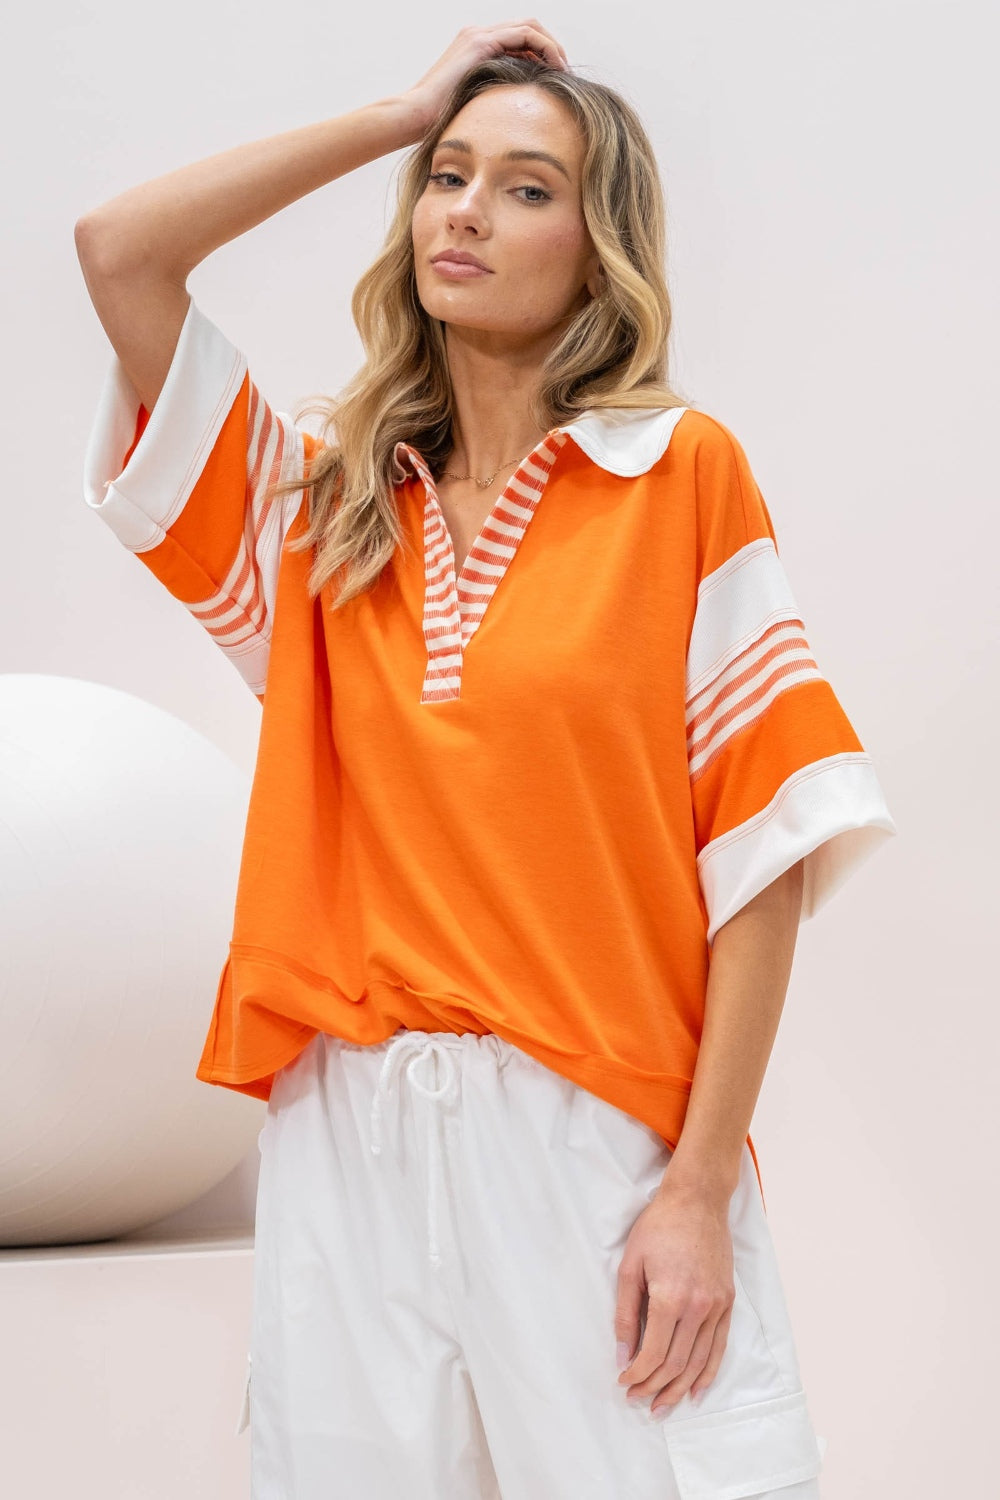 Casual orange top with white and orange striped details